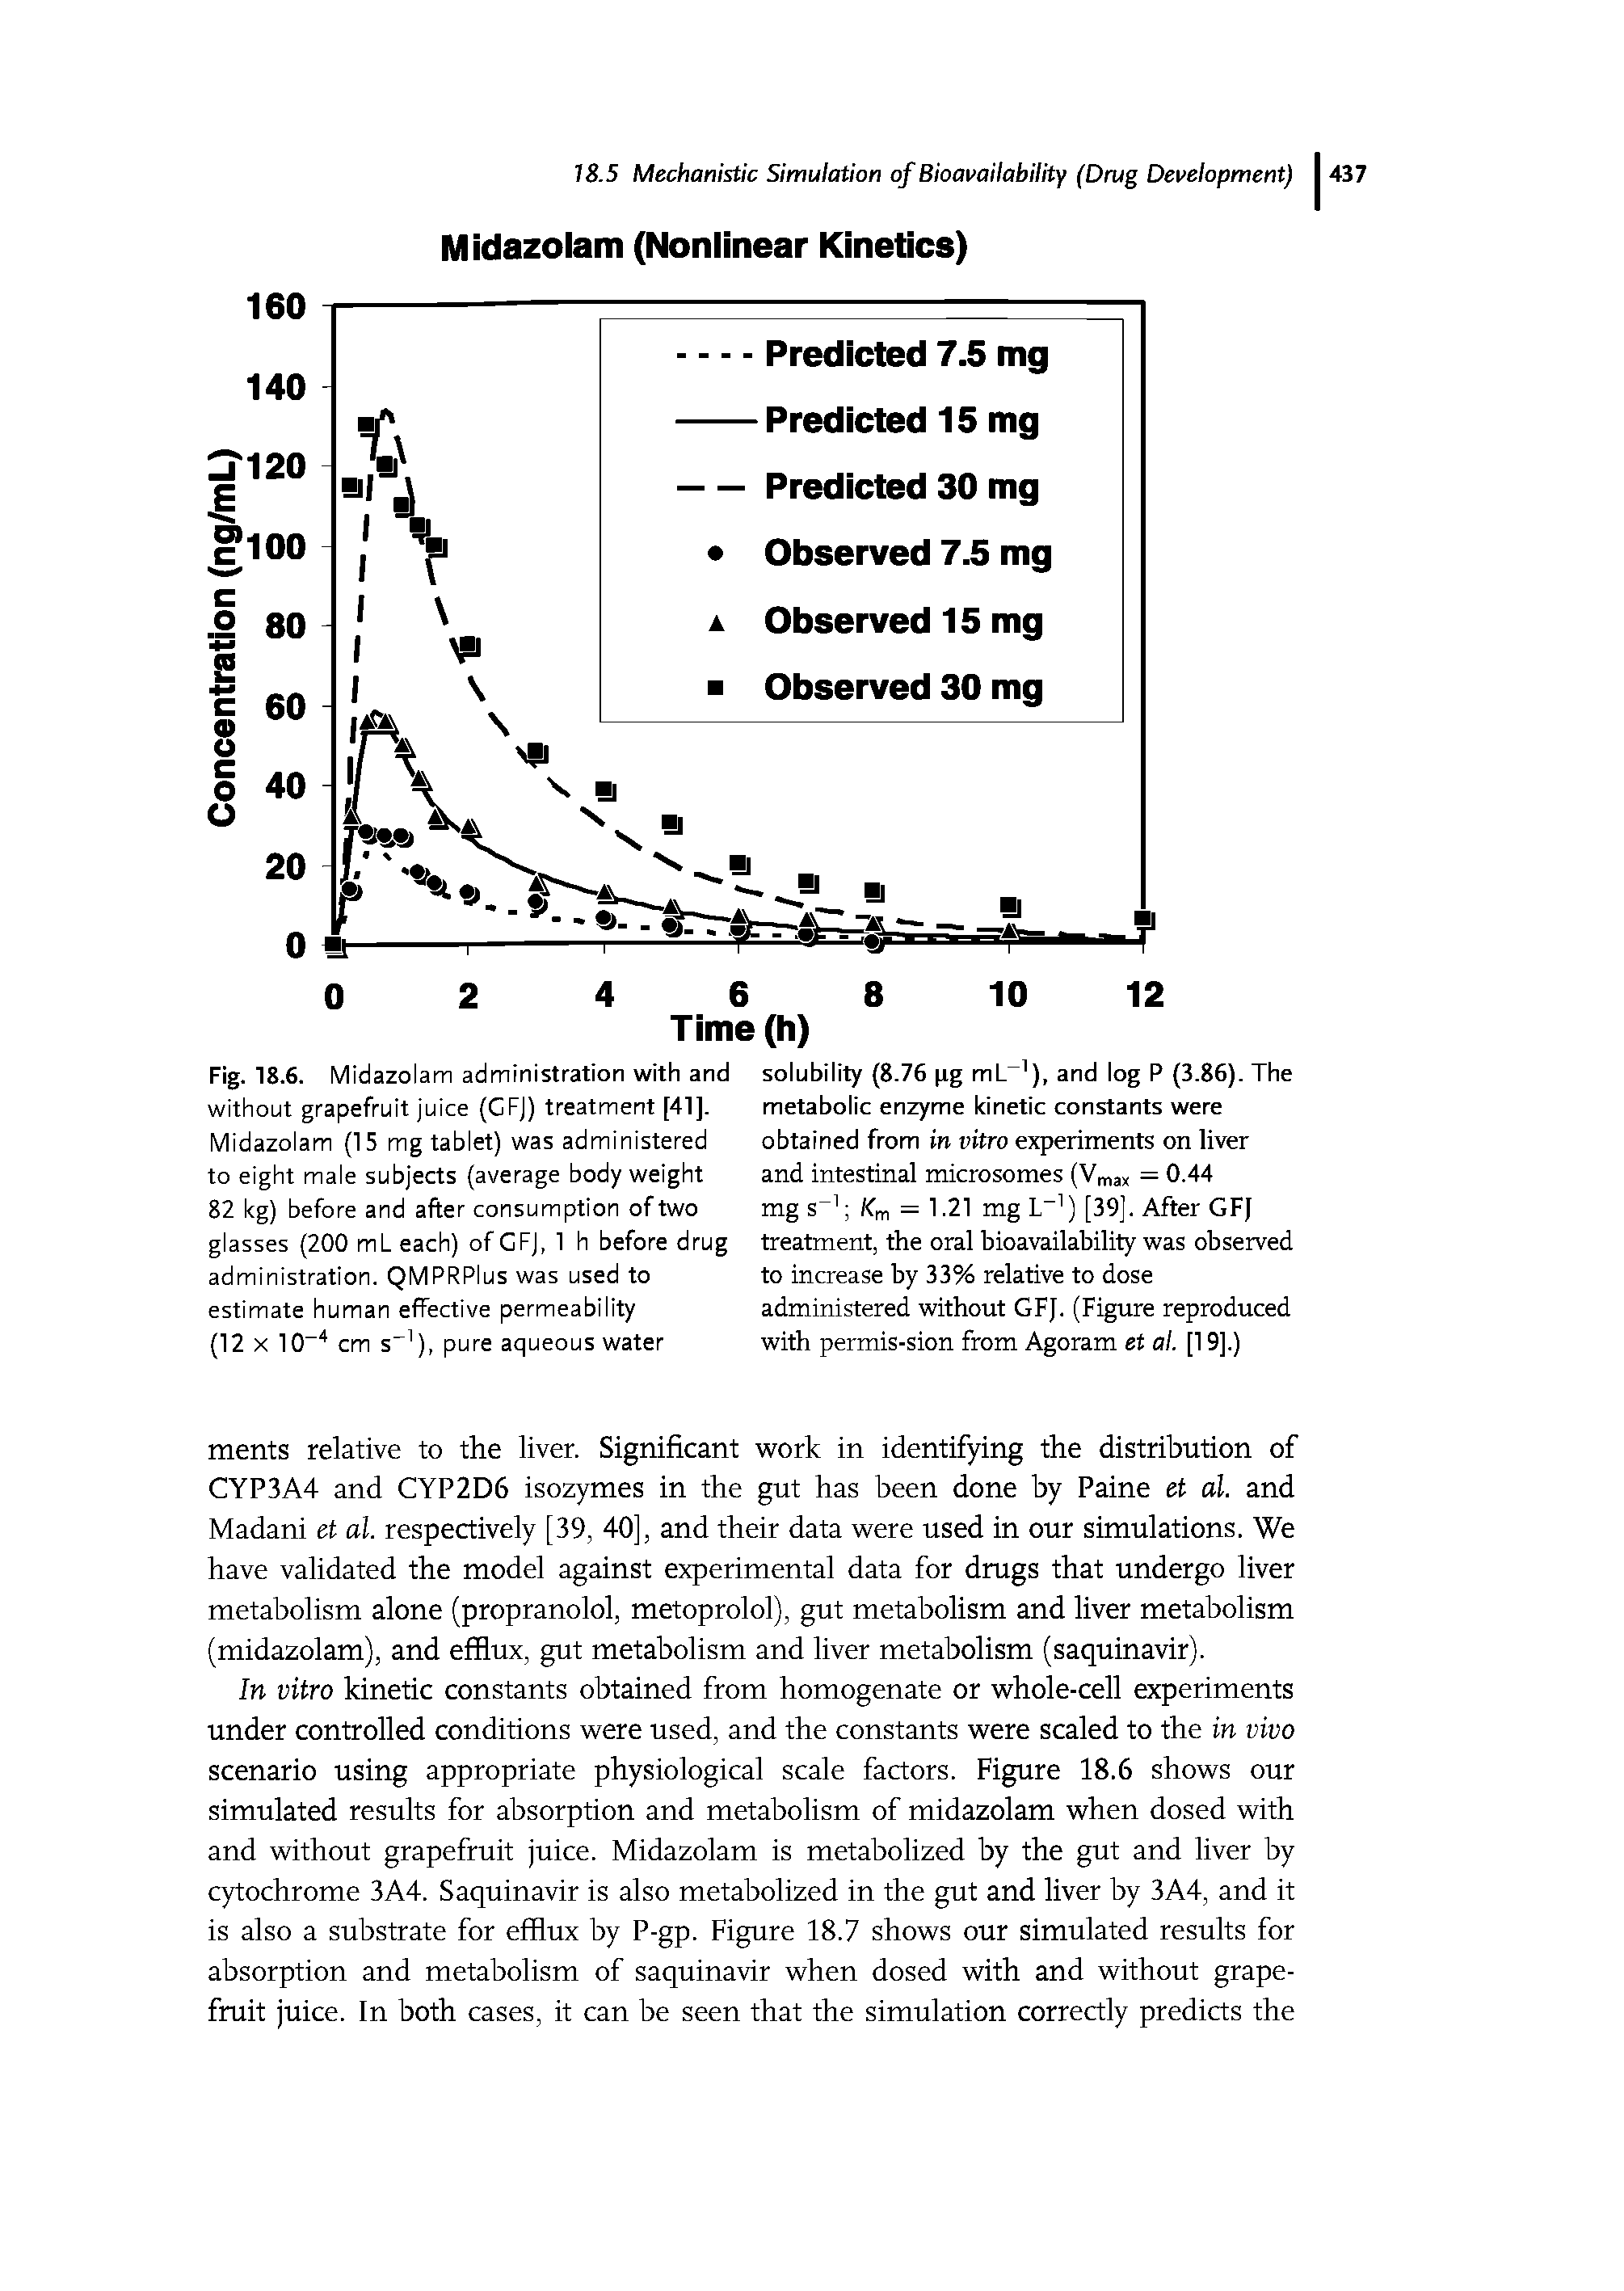 Fig. 18.6. Midazolam administration with and without grapefruit juice (CFJ) treatment [41]. Midazolam (15 mg tablet) was administered to eight male subjects (average body weight 82 kg) before and after consumption of two glasses (200 mL each) of CFJ, 1 h before drug administration. QMPRPIus was used to estimate human effective permeability (12 x 10 4 cm s 1), pure aqueous water...